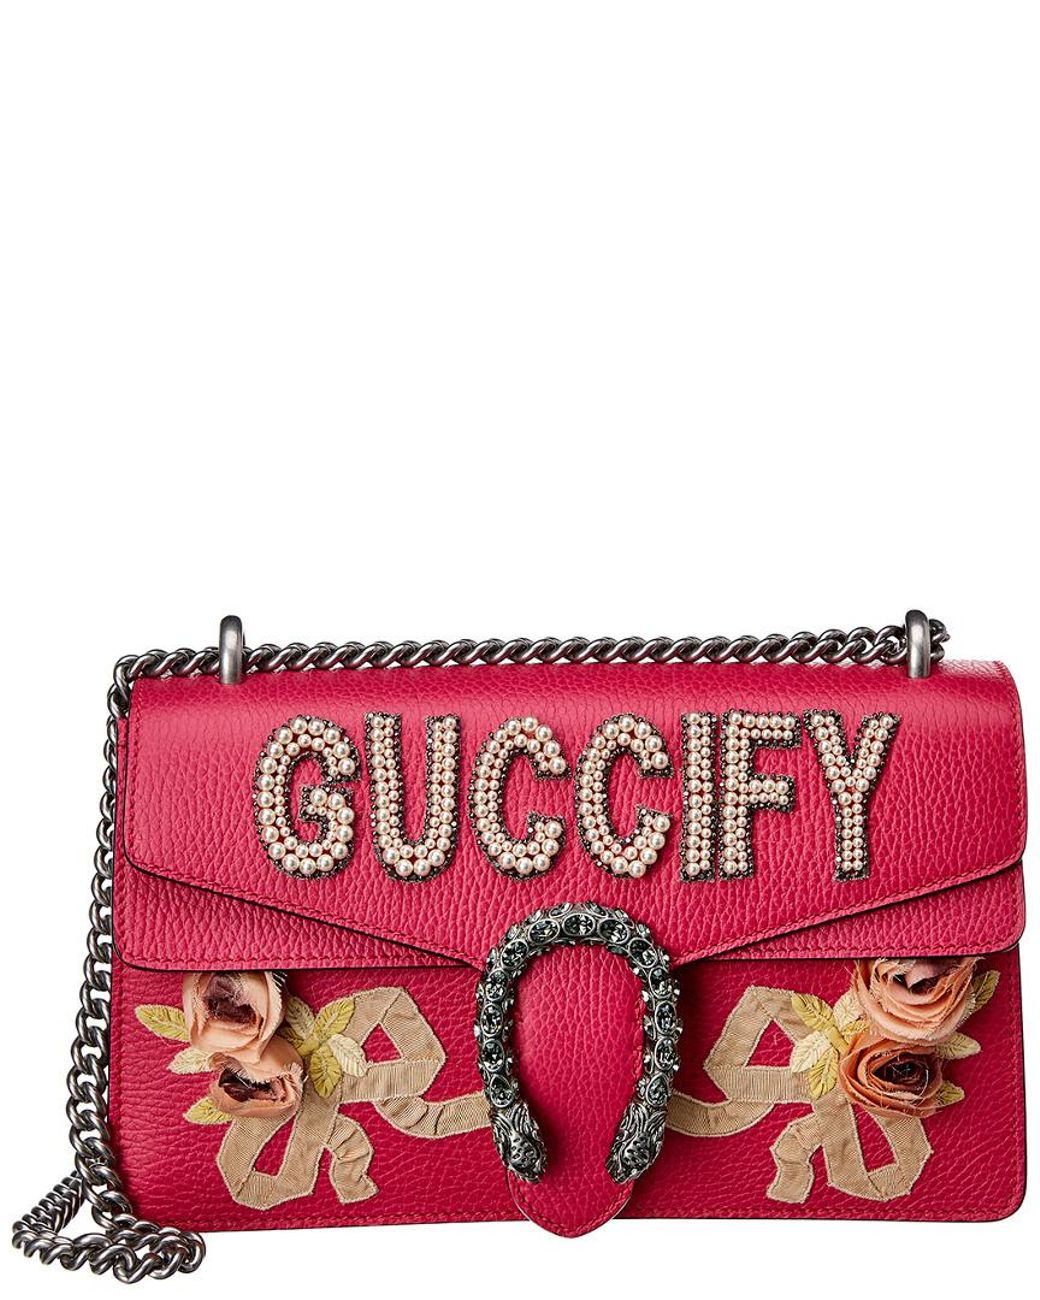 Gucci 400249 Small Dionysus Pink Leather Shoulder Bag | Lyst